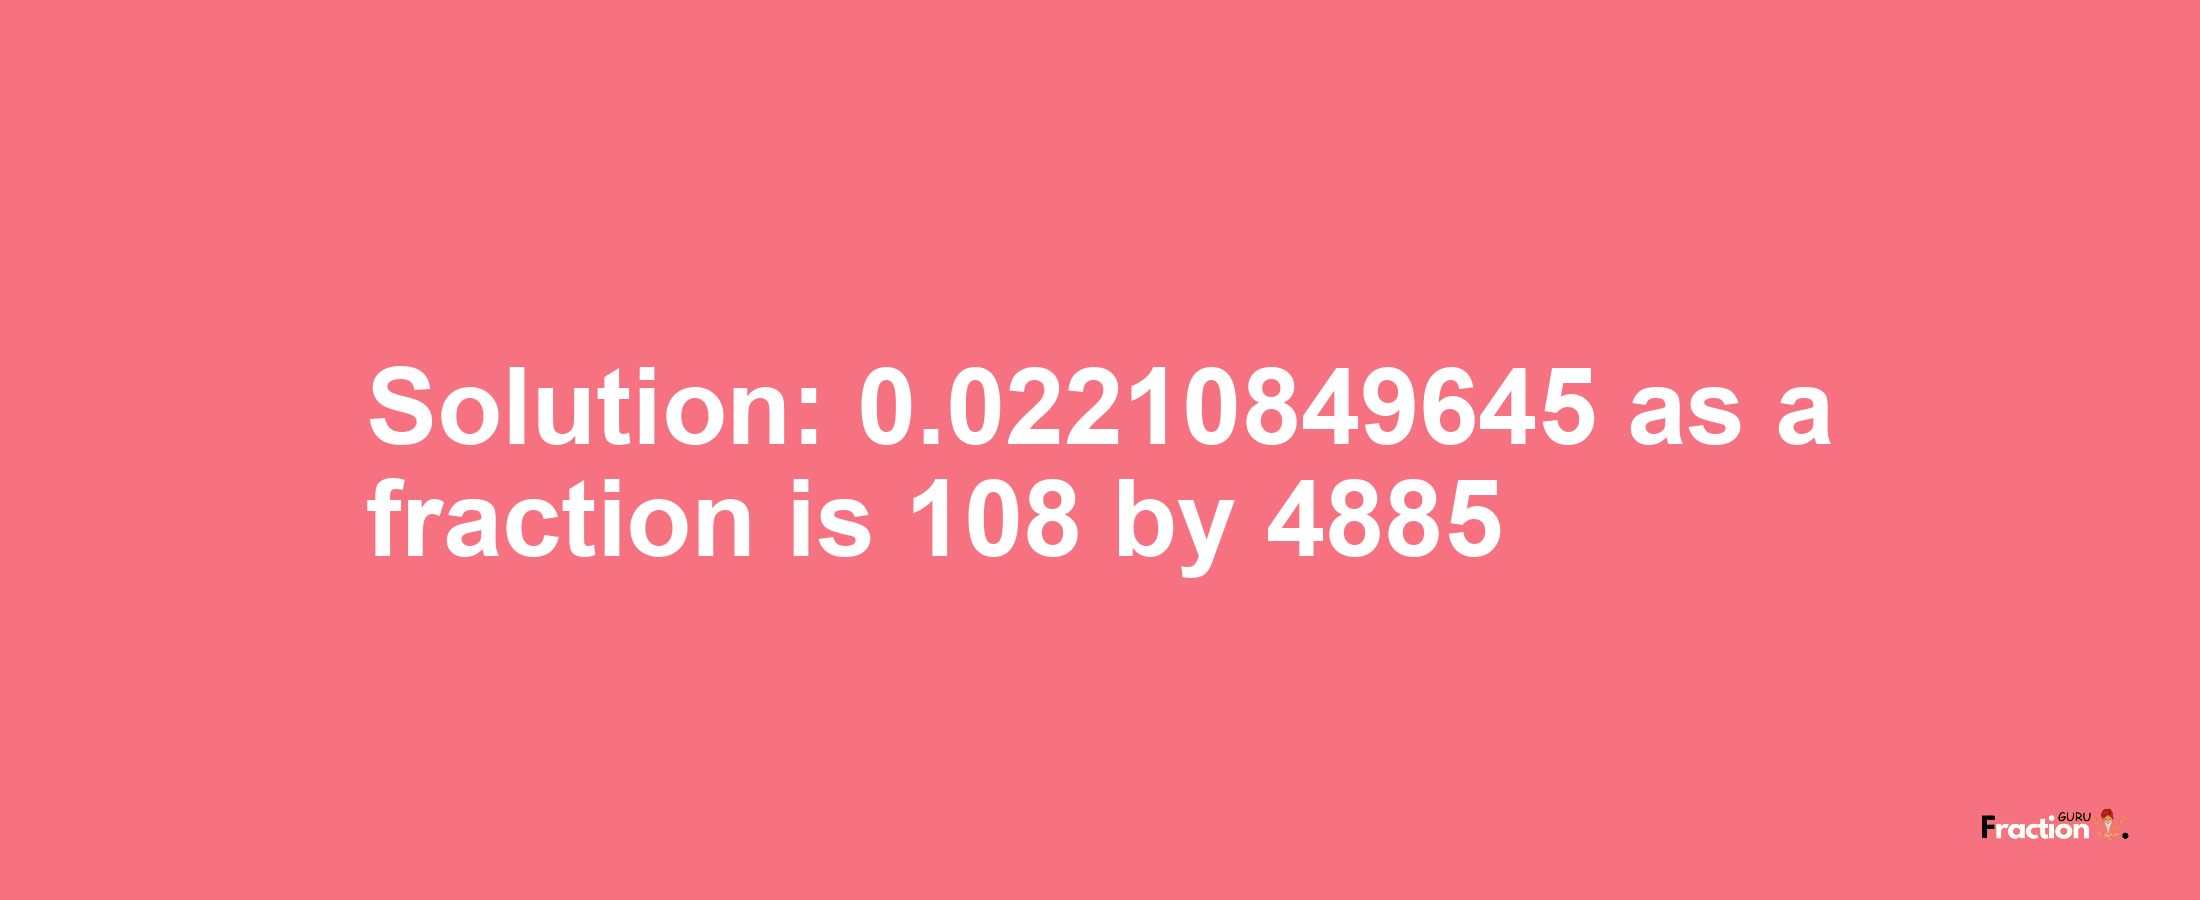 Solution:0.02210849645 as a fraction is 108/4885